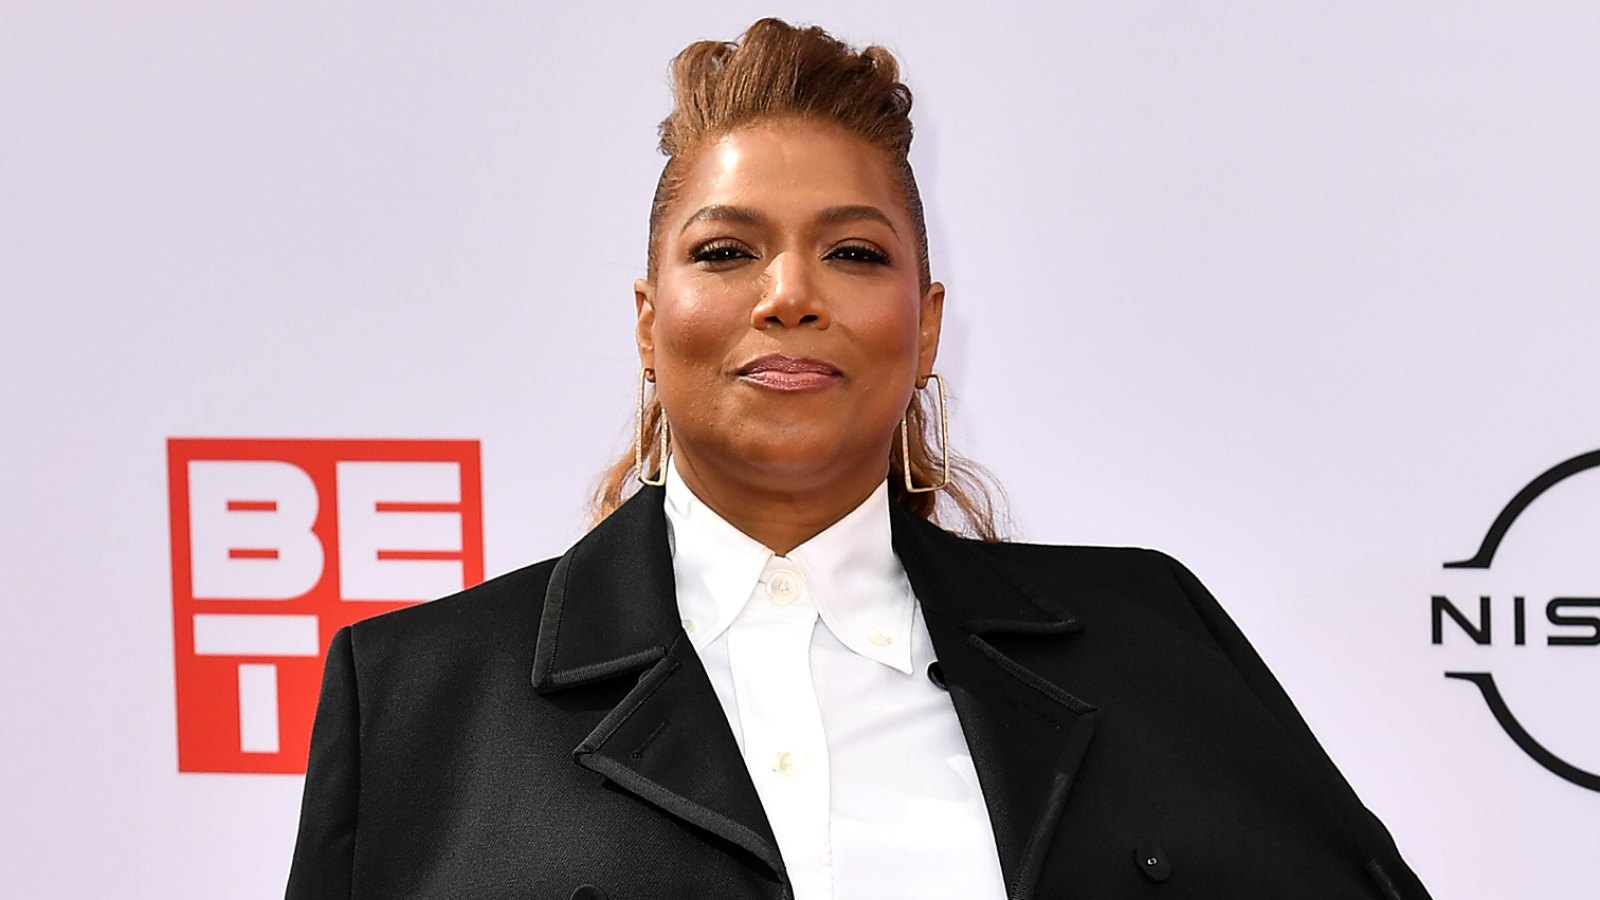 https://www.usmagazine.com/wp-content/uploads/2021/10/Queen-Latifah-Was-Asked-to-Lose-Weight-for-Living-Single-Role.jpg?crop=0px%2C0px%2C1512px%2C854px&resize=1600%2C900&quality=86&strip=all